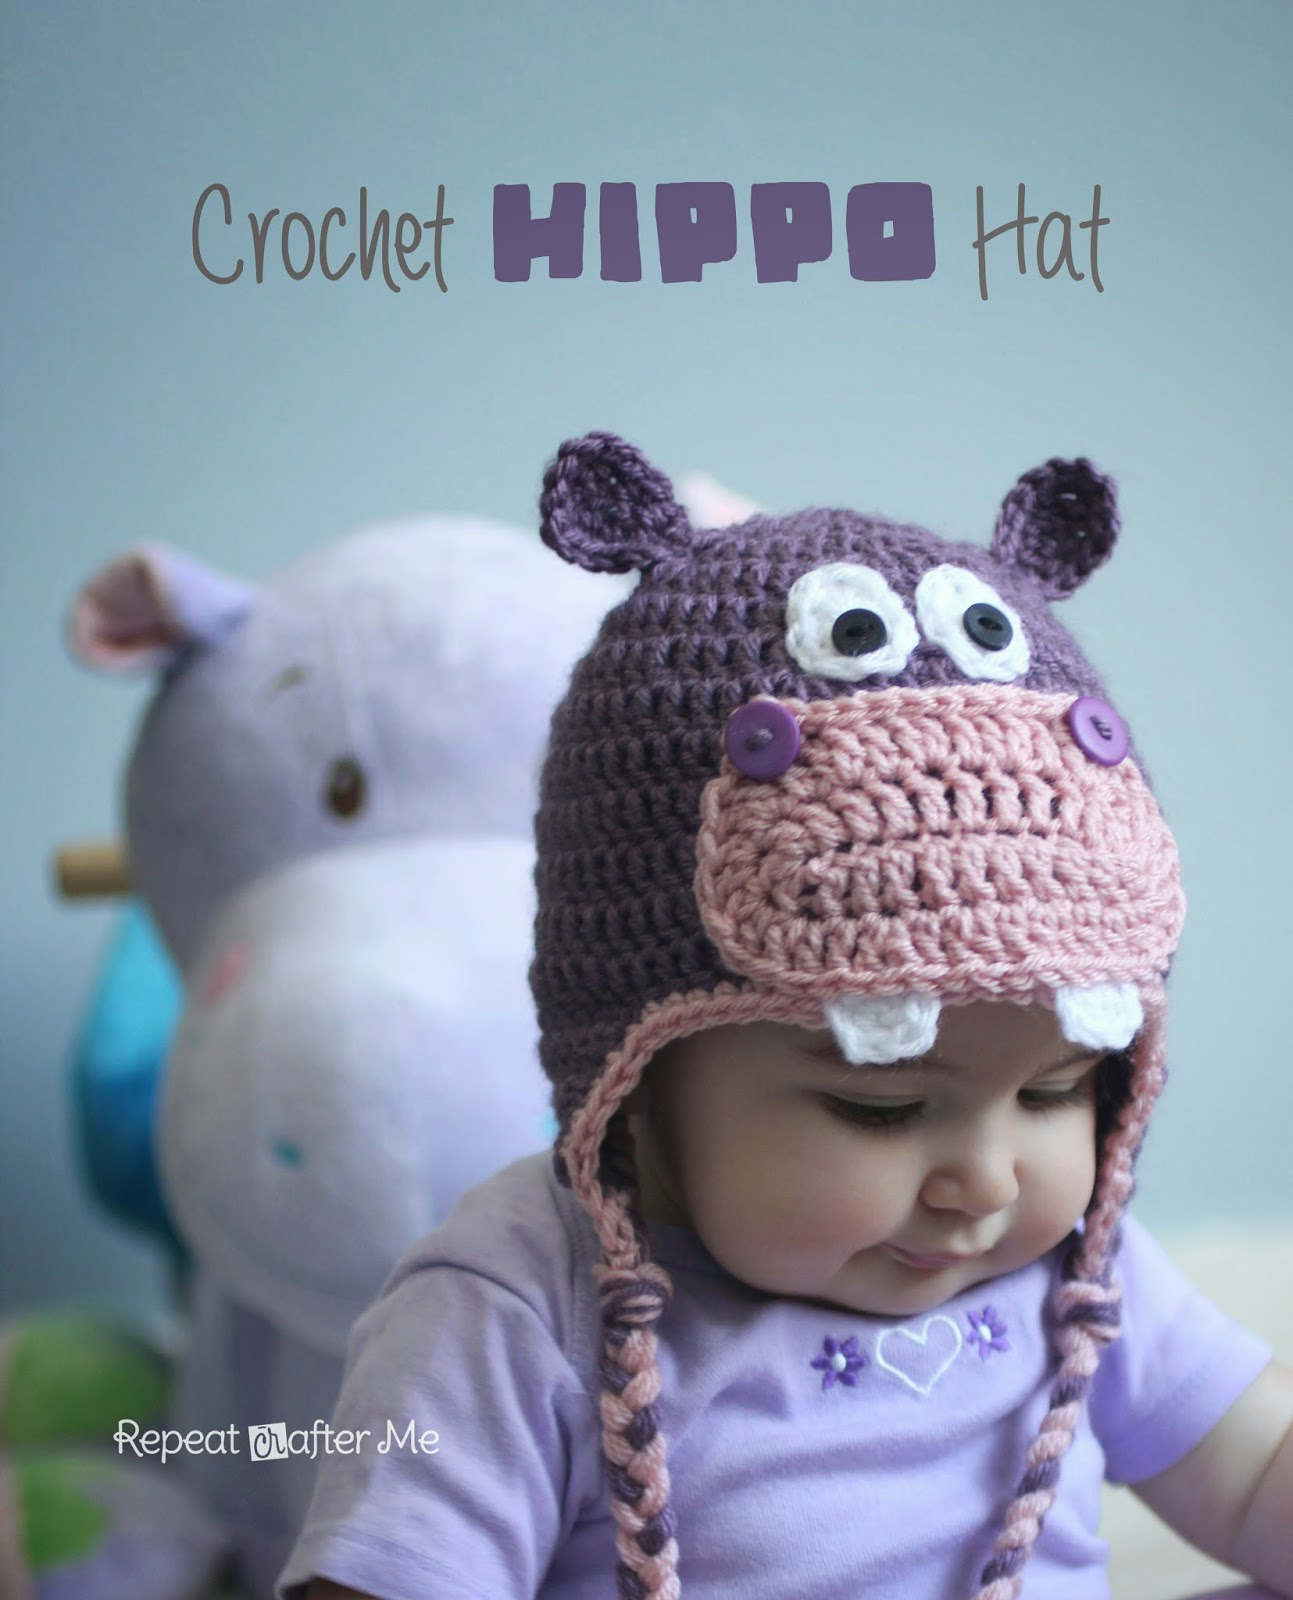 Repeat Crafter Me Crochet Owl Hat Pattern 41 Adorable Crochet Ba Hats Patterns To Make